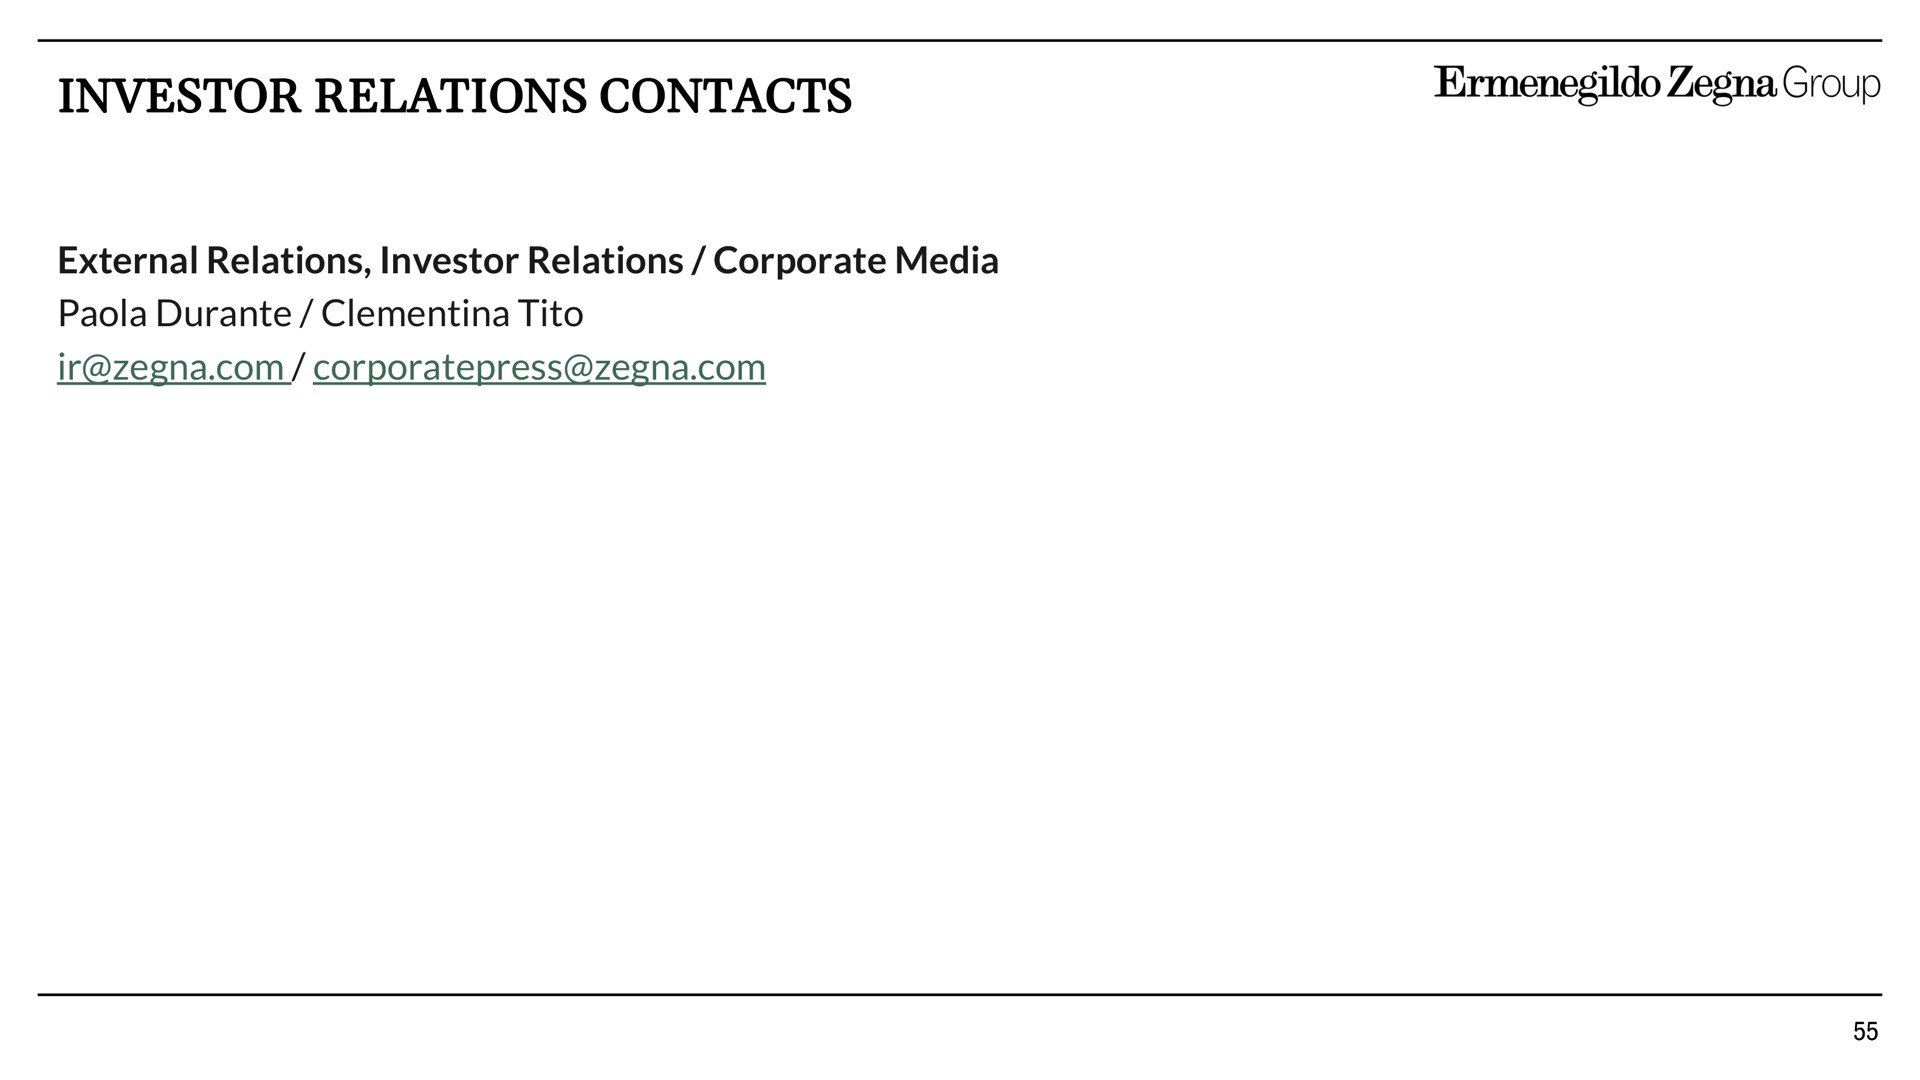 investor relations contacts group | Zegna